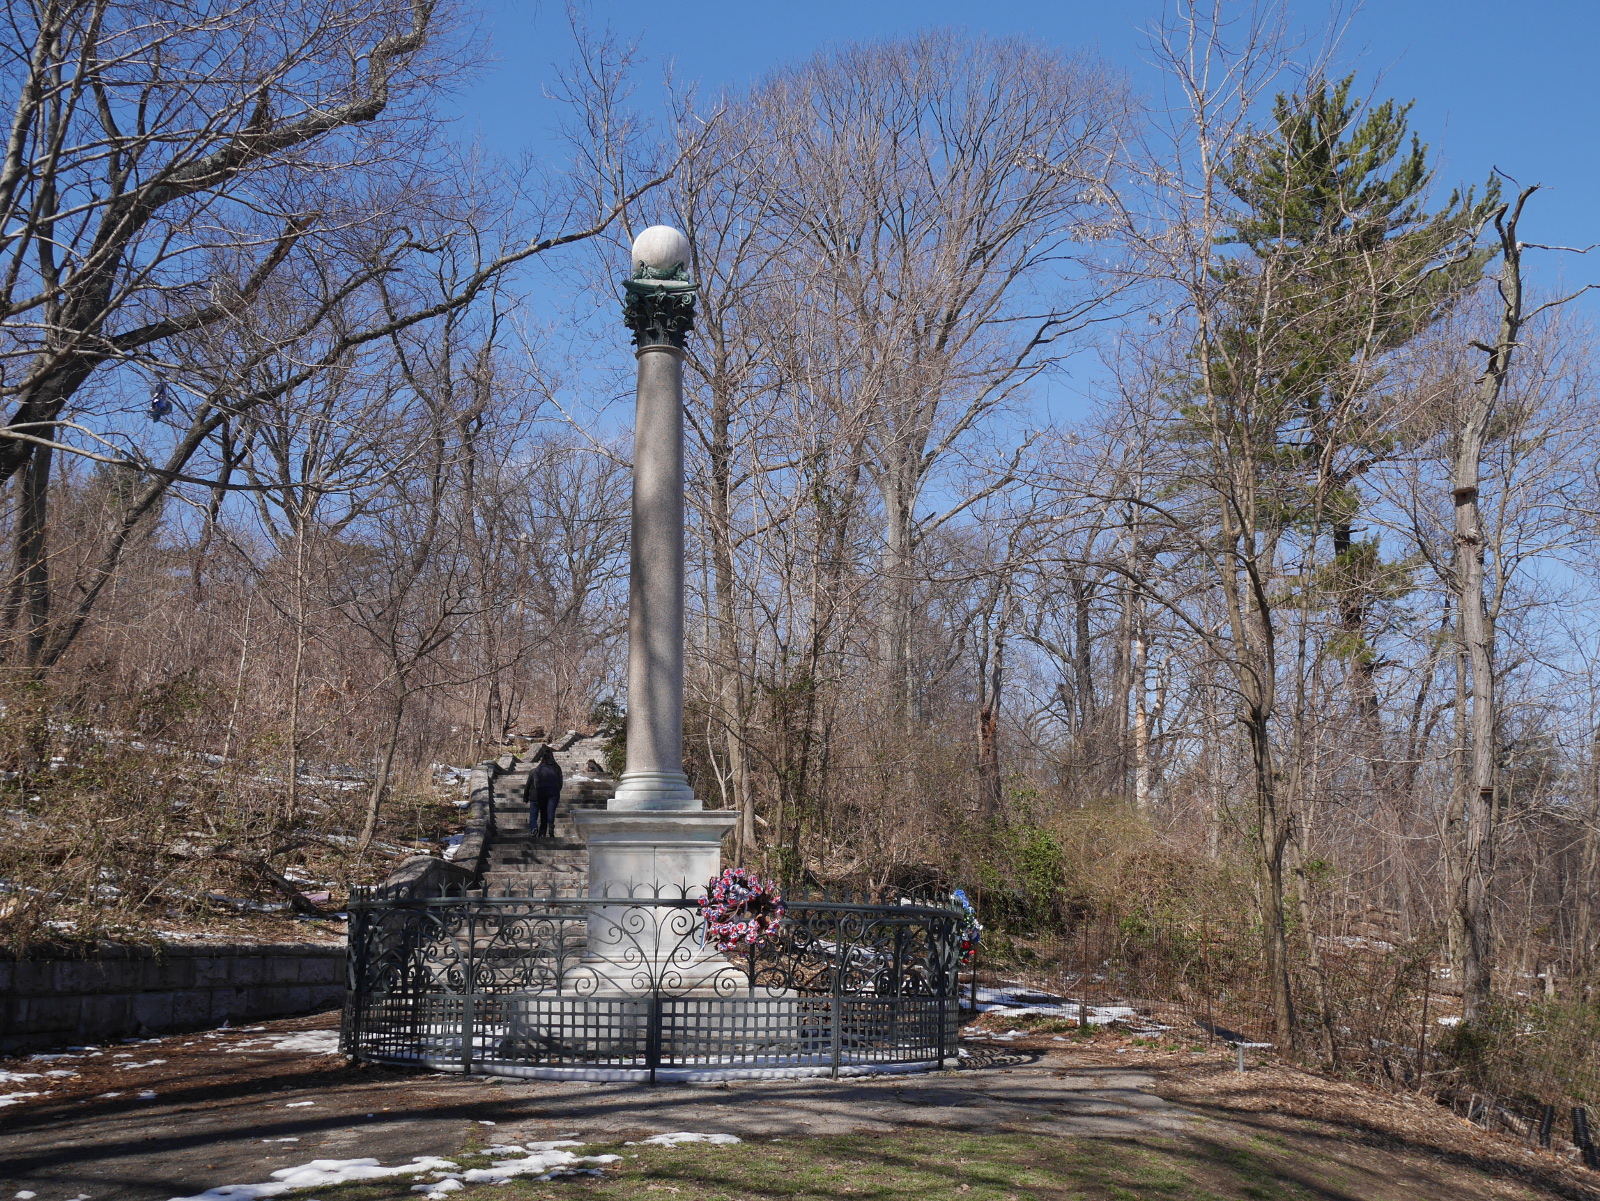 Memorial to "Maryland's Four Hundred" in Prospect Park, Brooklyn.